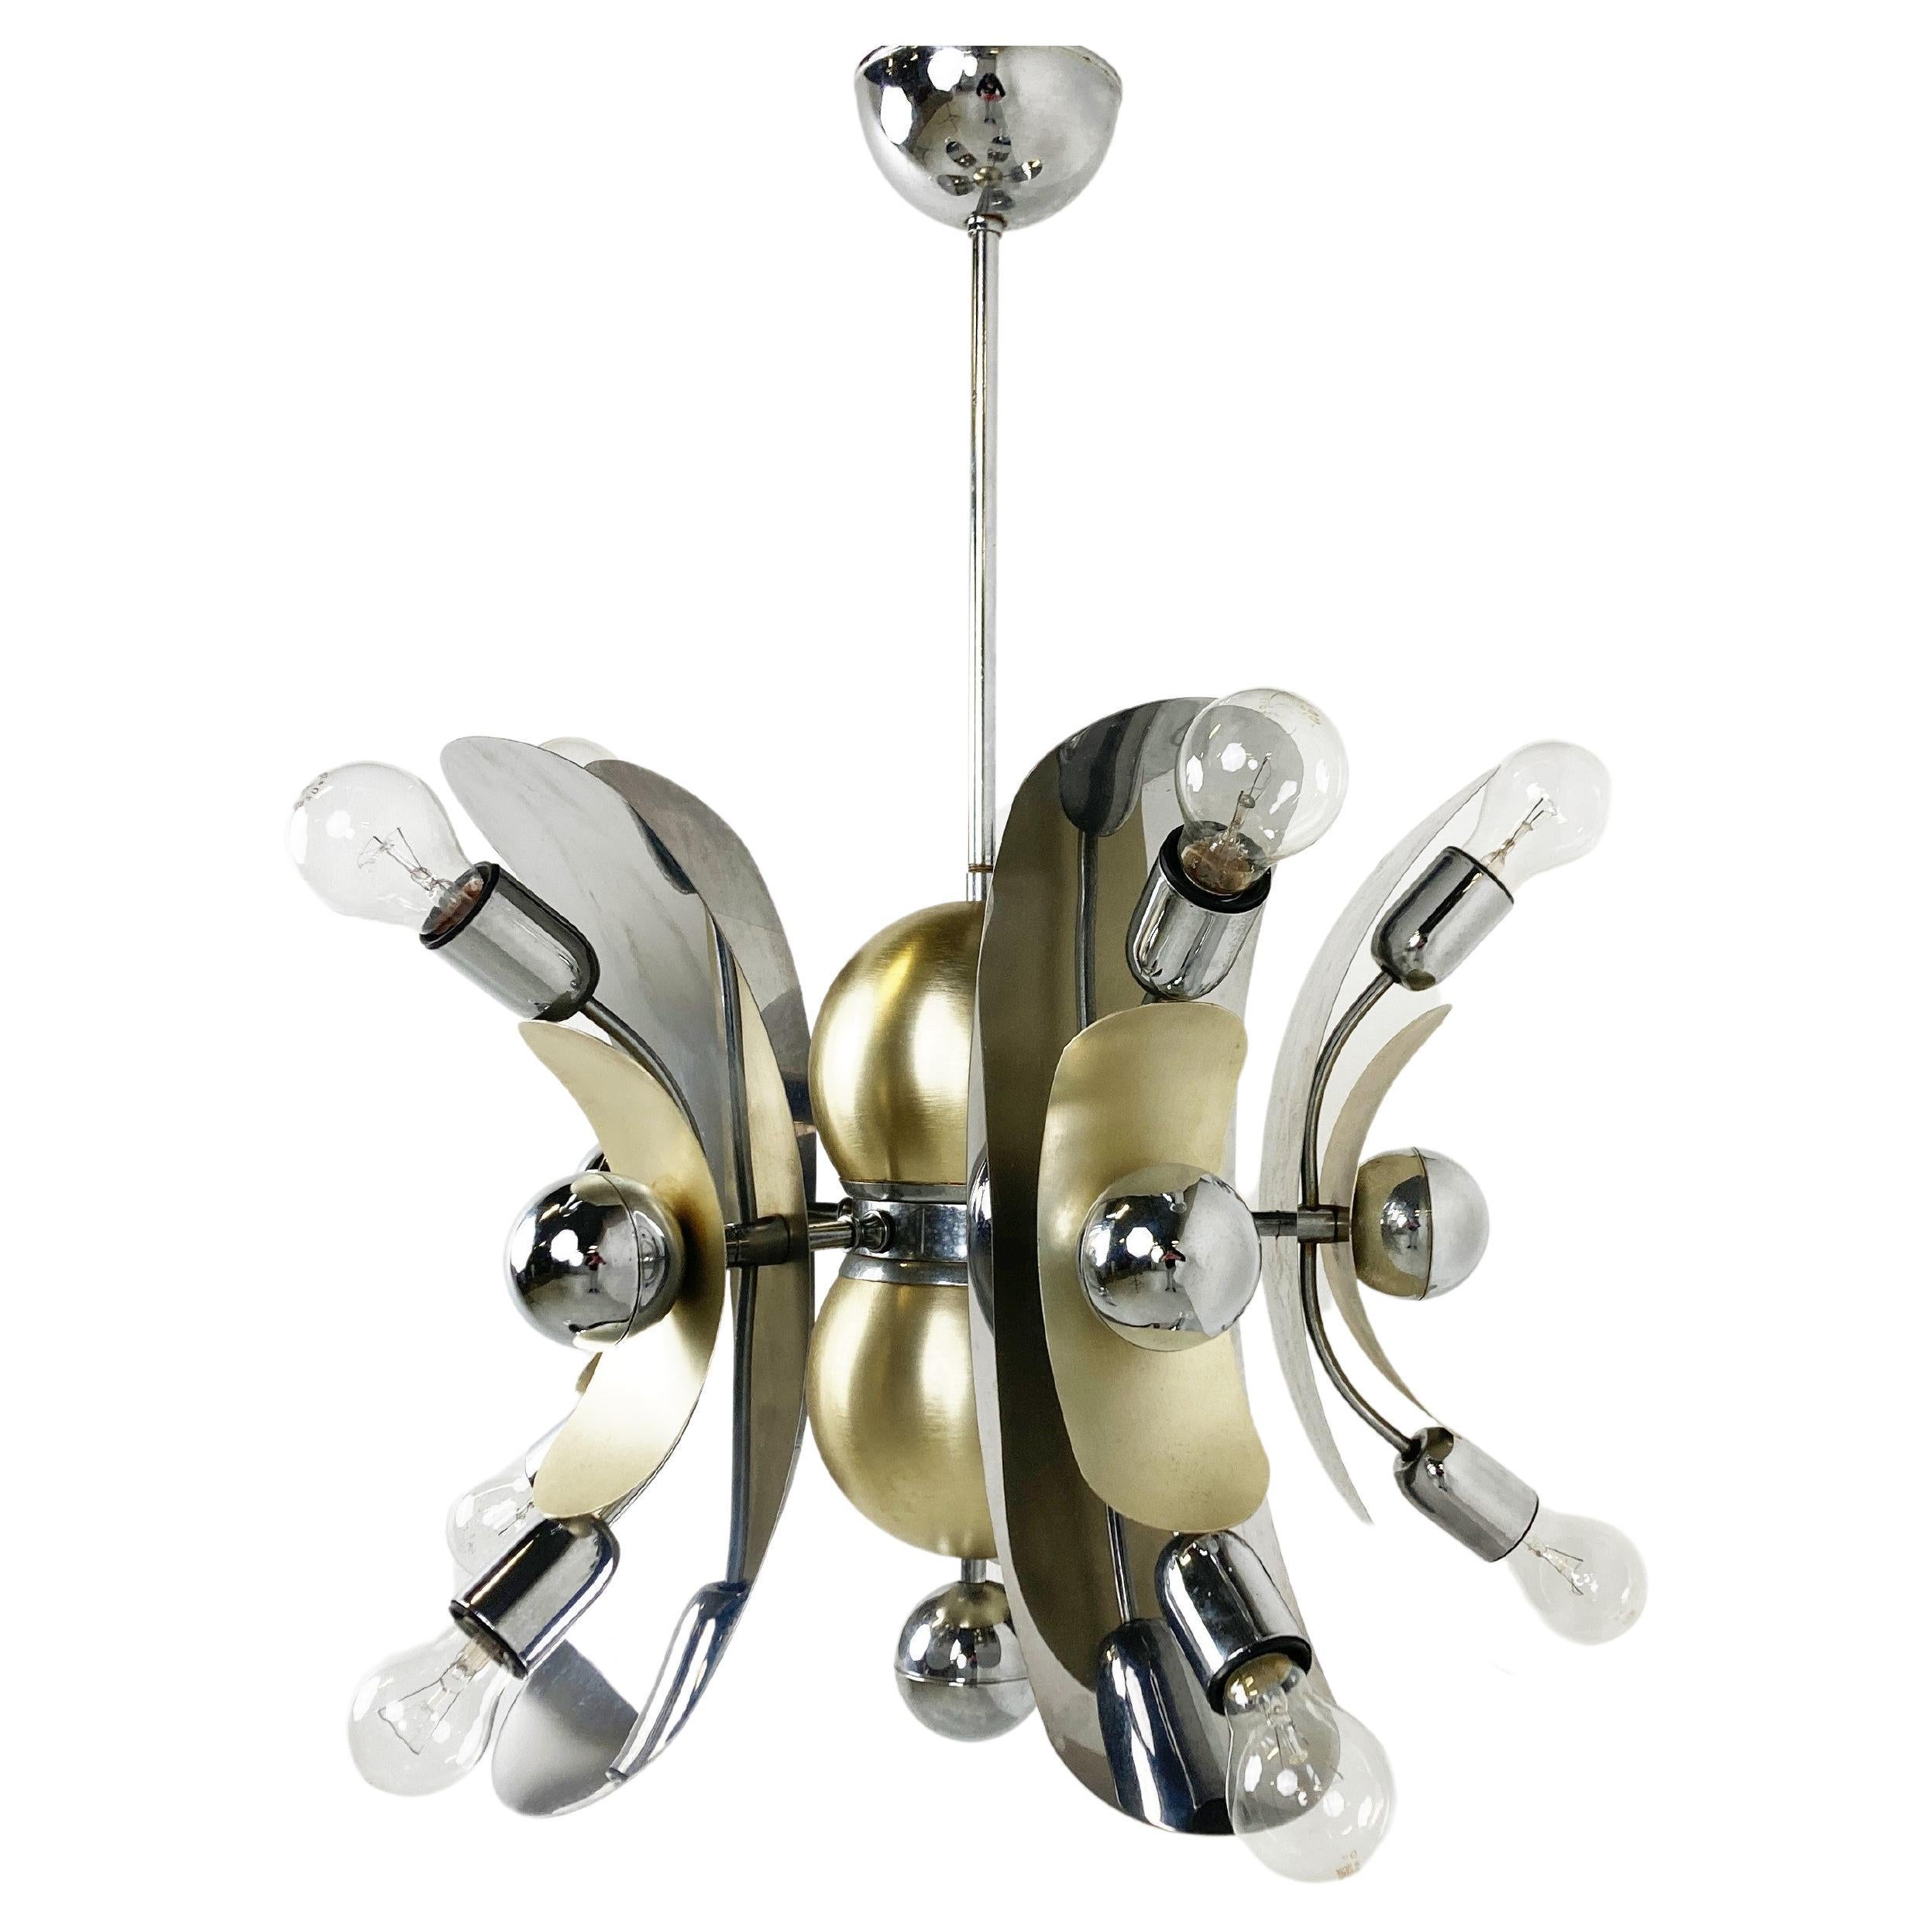 Vintage Italian Chrome and Brass Chandelier, 1970s For Sale